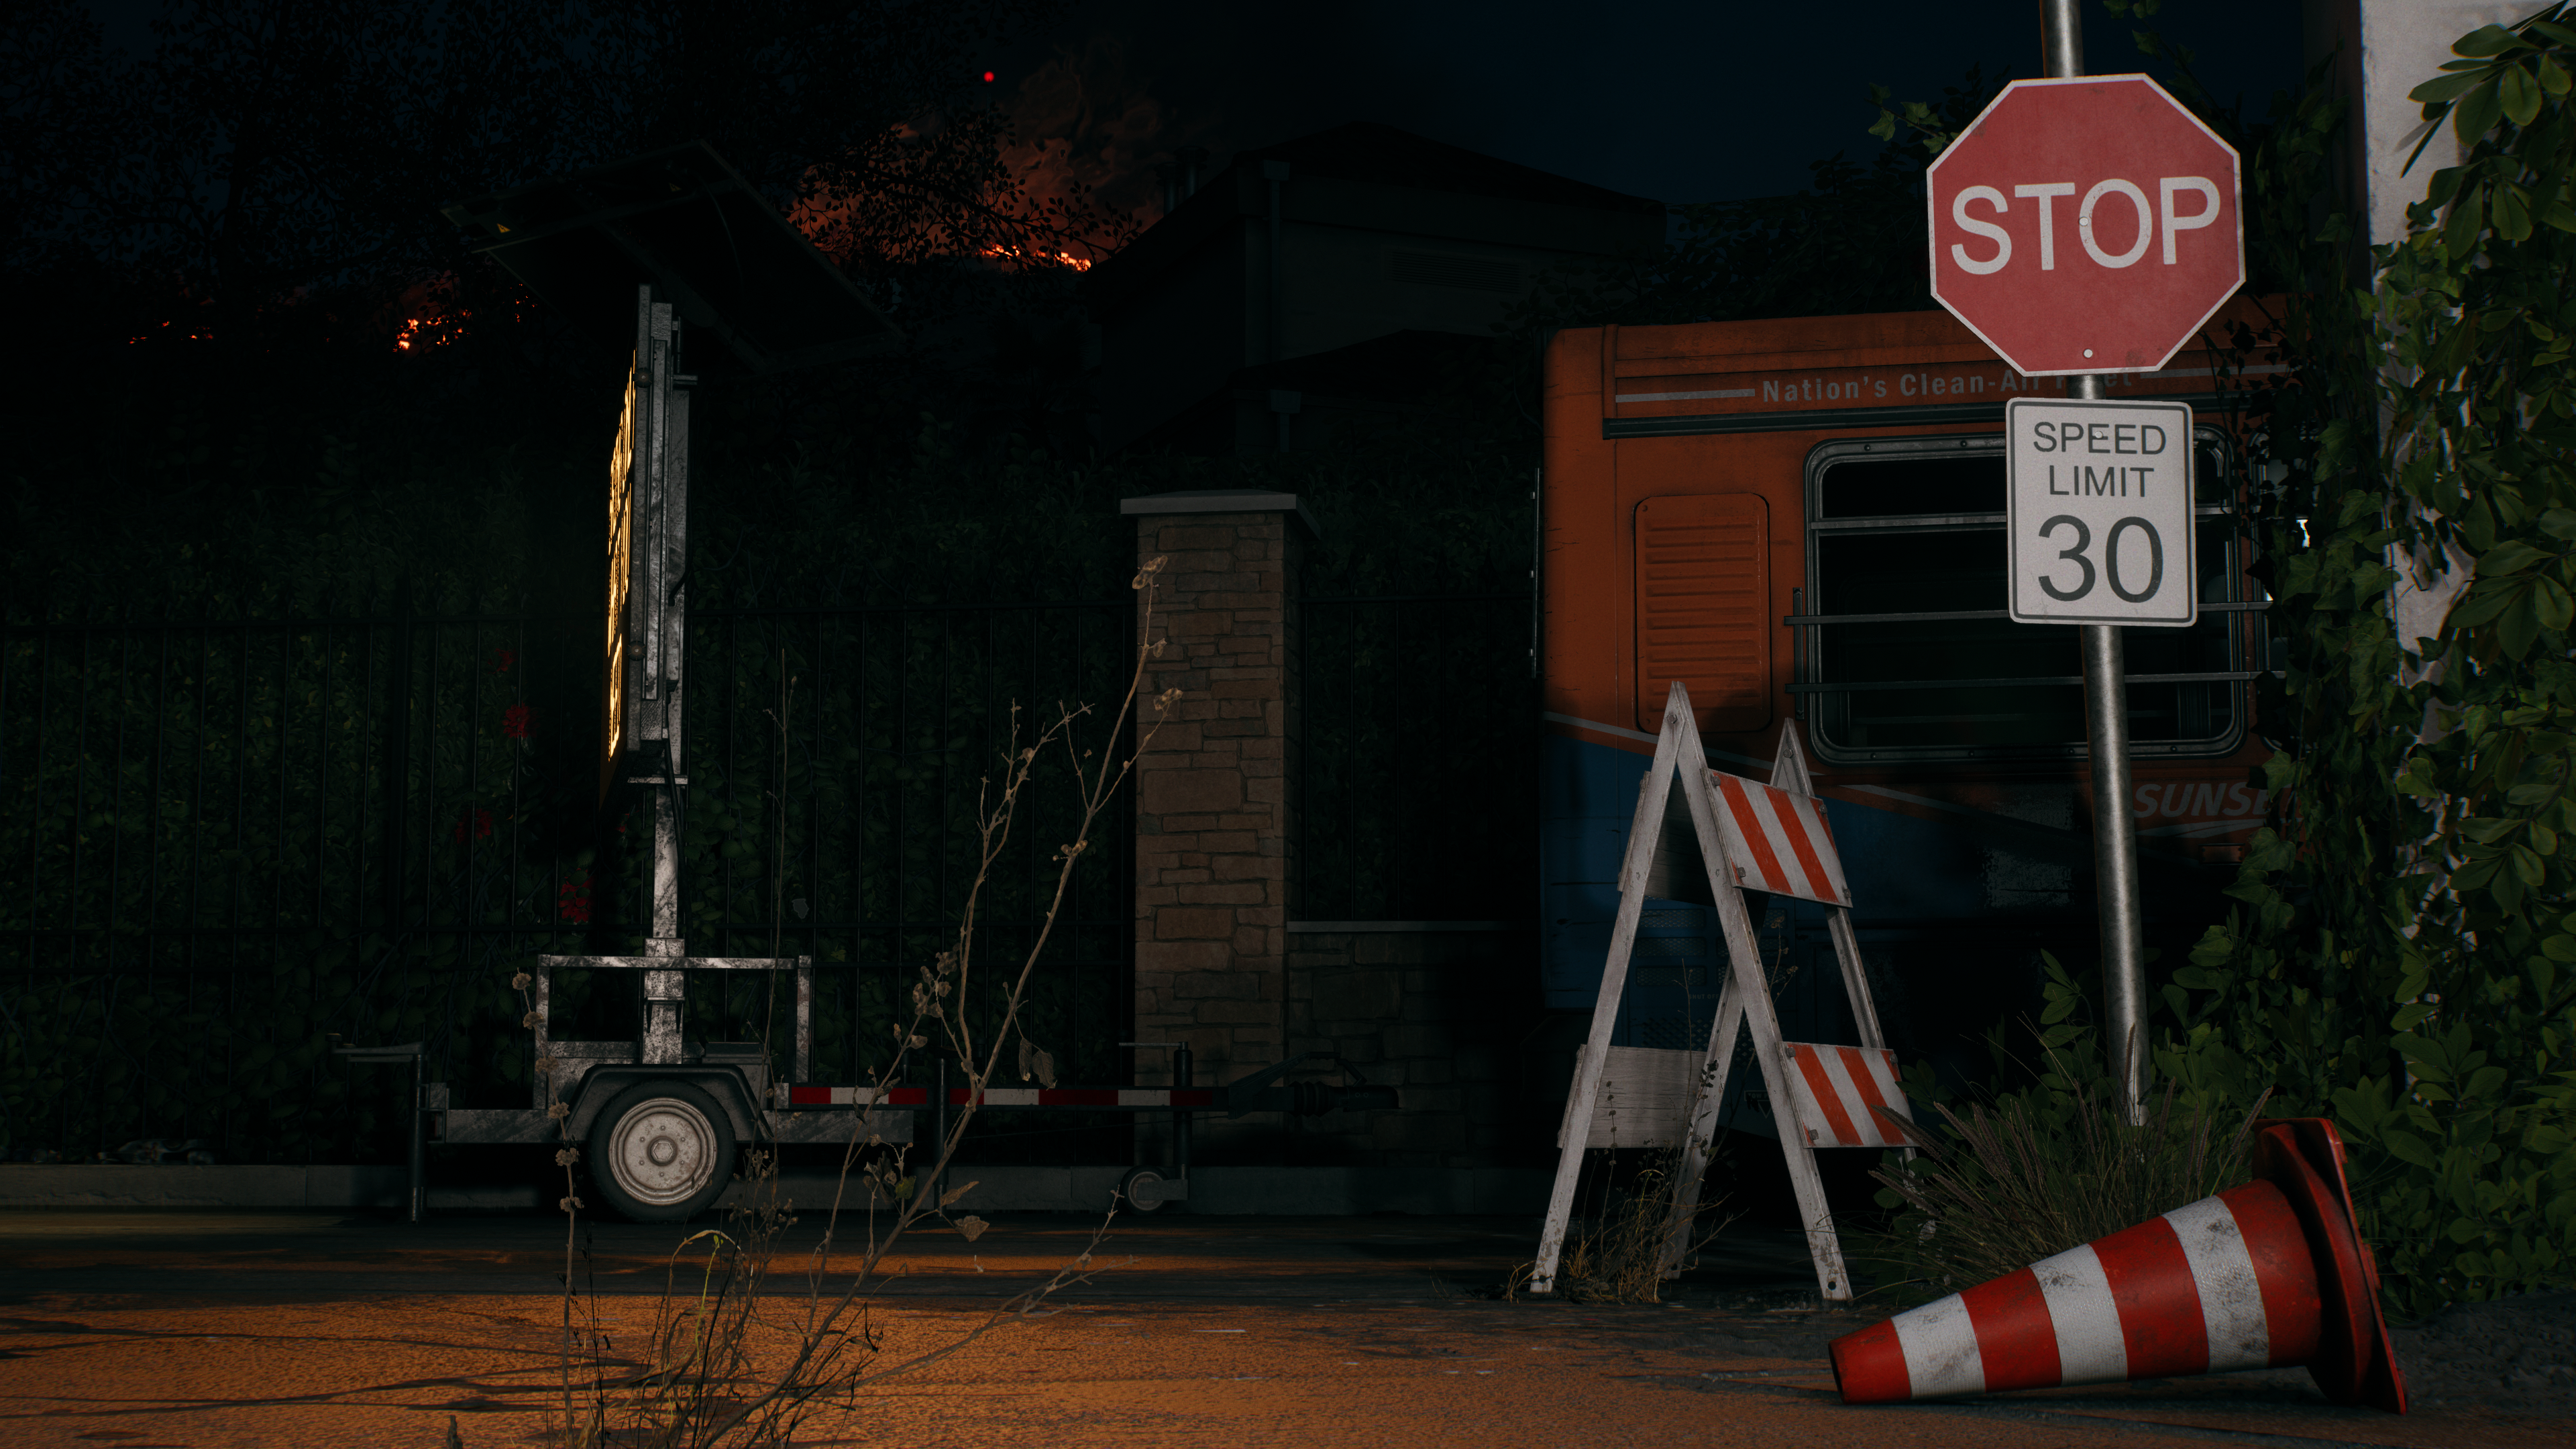 General 3840x2160 Dead Island 2 Nvidia RTX video games CGI signs stop sign night traffic cone leaves